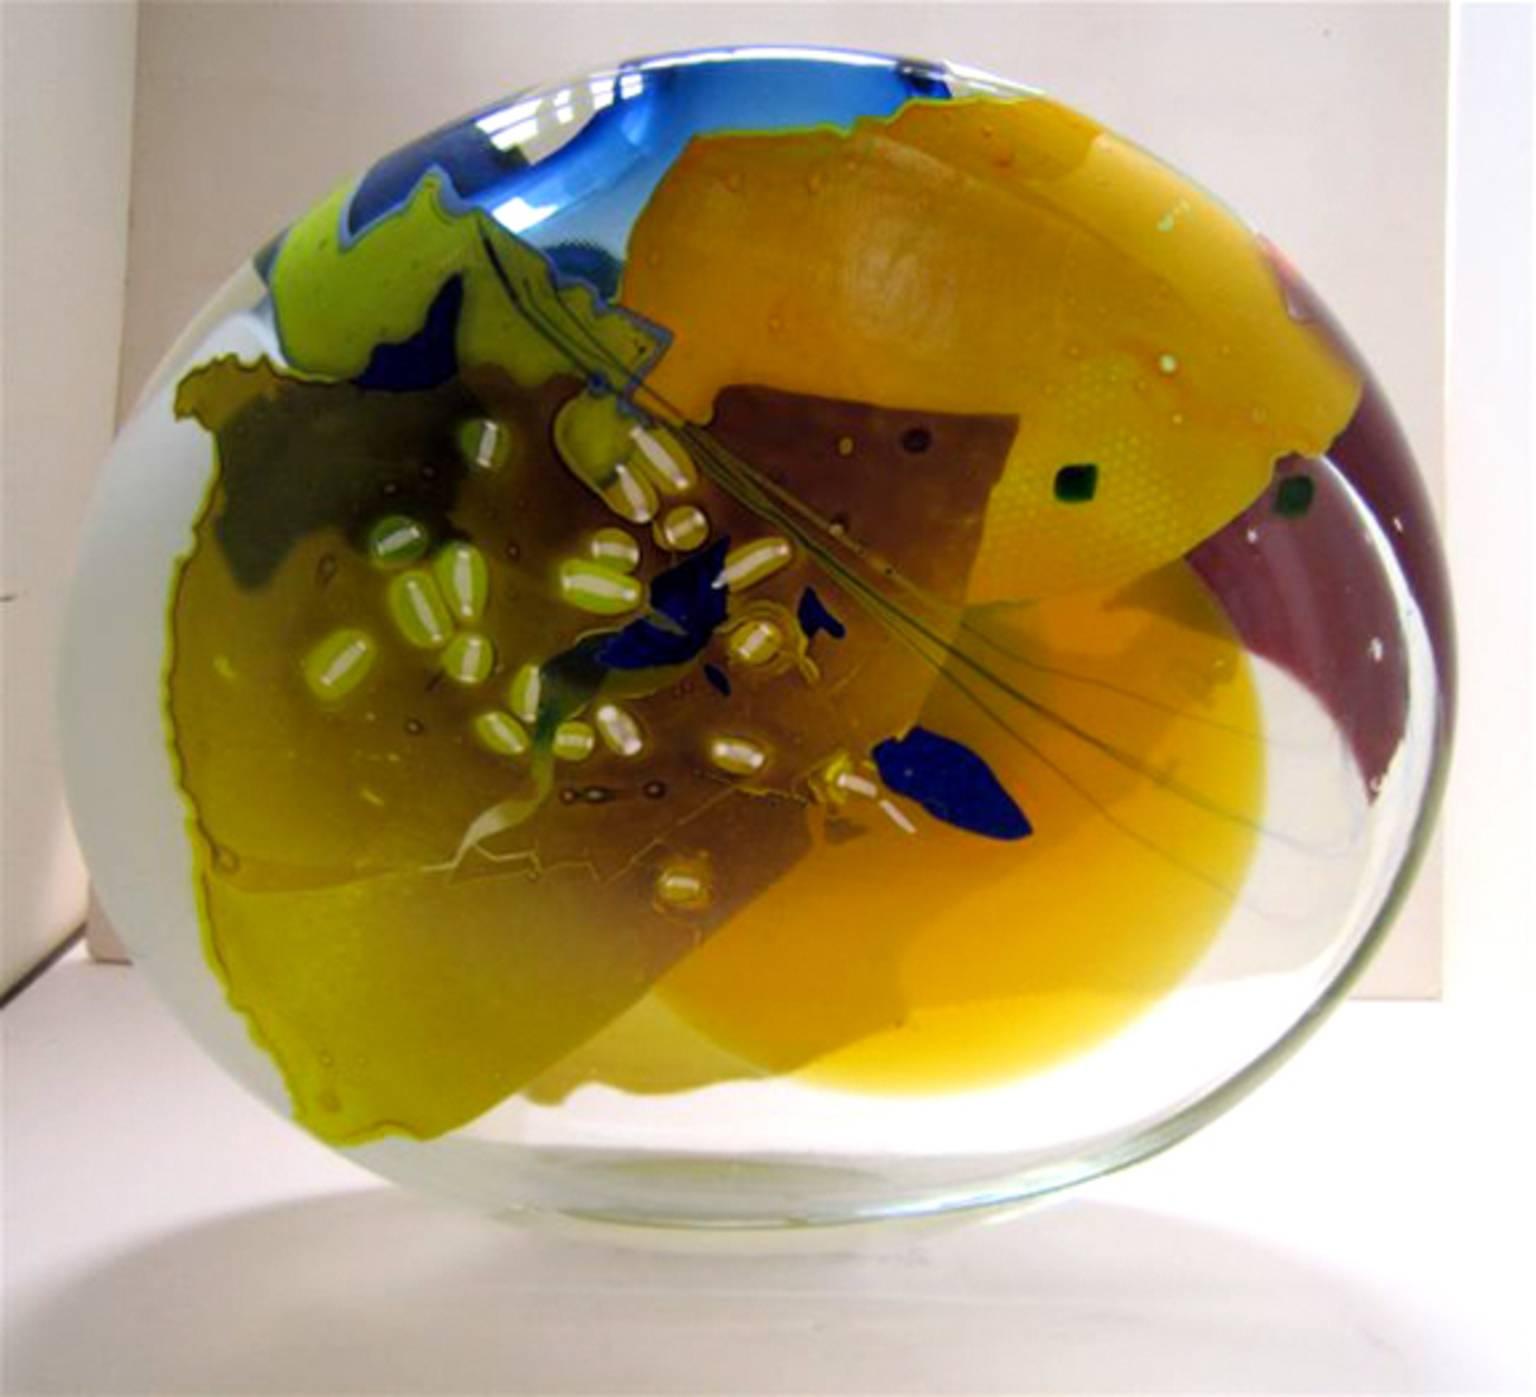 Joel Philip Myers
Summer Joy, 1988
Blown glass with applied elements
18.75 x 17 x 3.5 in

Myers’ work is characterized by exquisite craftsmanship and an extraordinarily strong sense of formal design. Joel Myers also possesses an encyclopedic list of